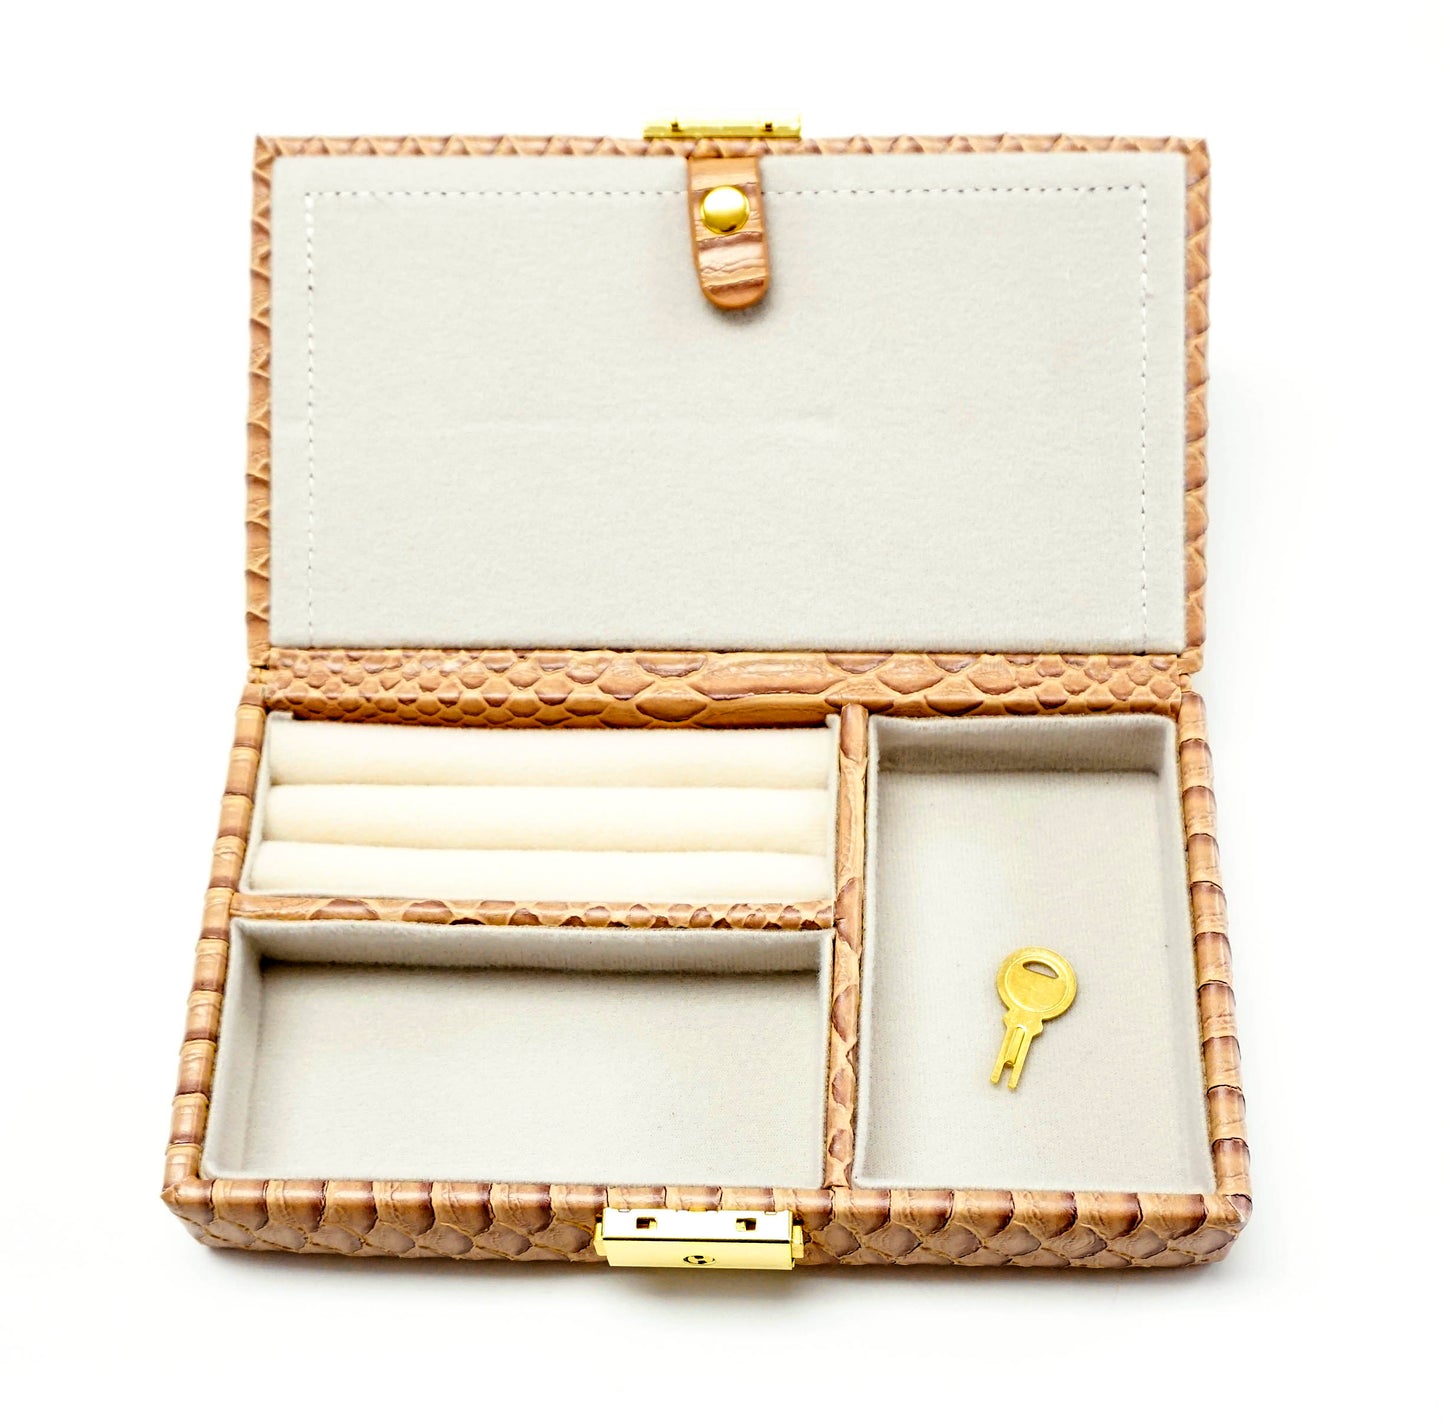 Leather Jewelry Box ~ Almond Leather Jewelry Box with Interior Compartments for Needlepoint Canvas LEE